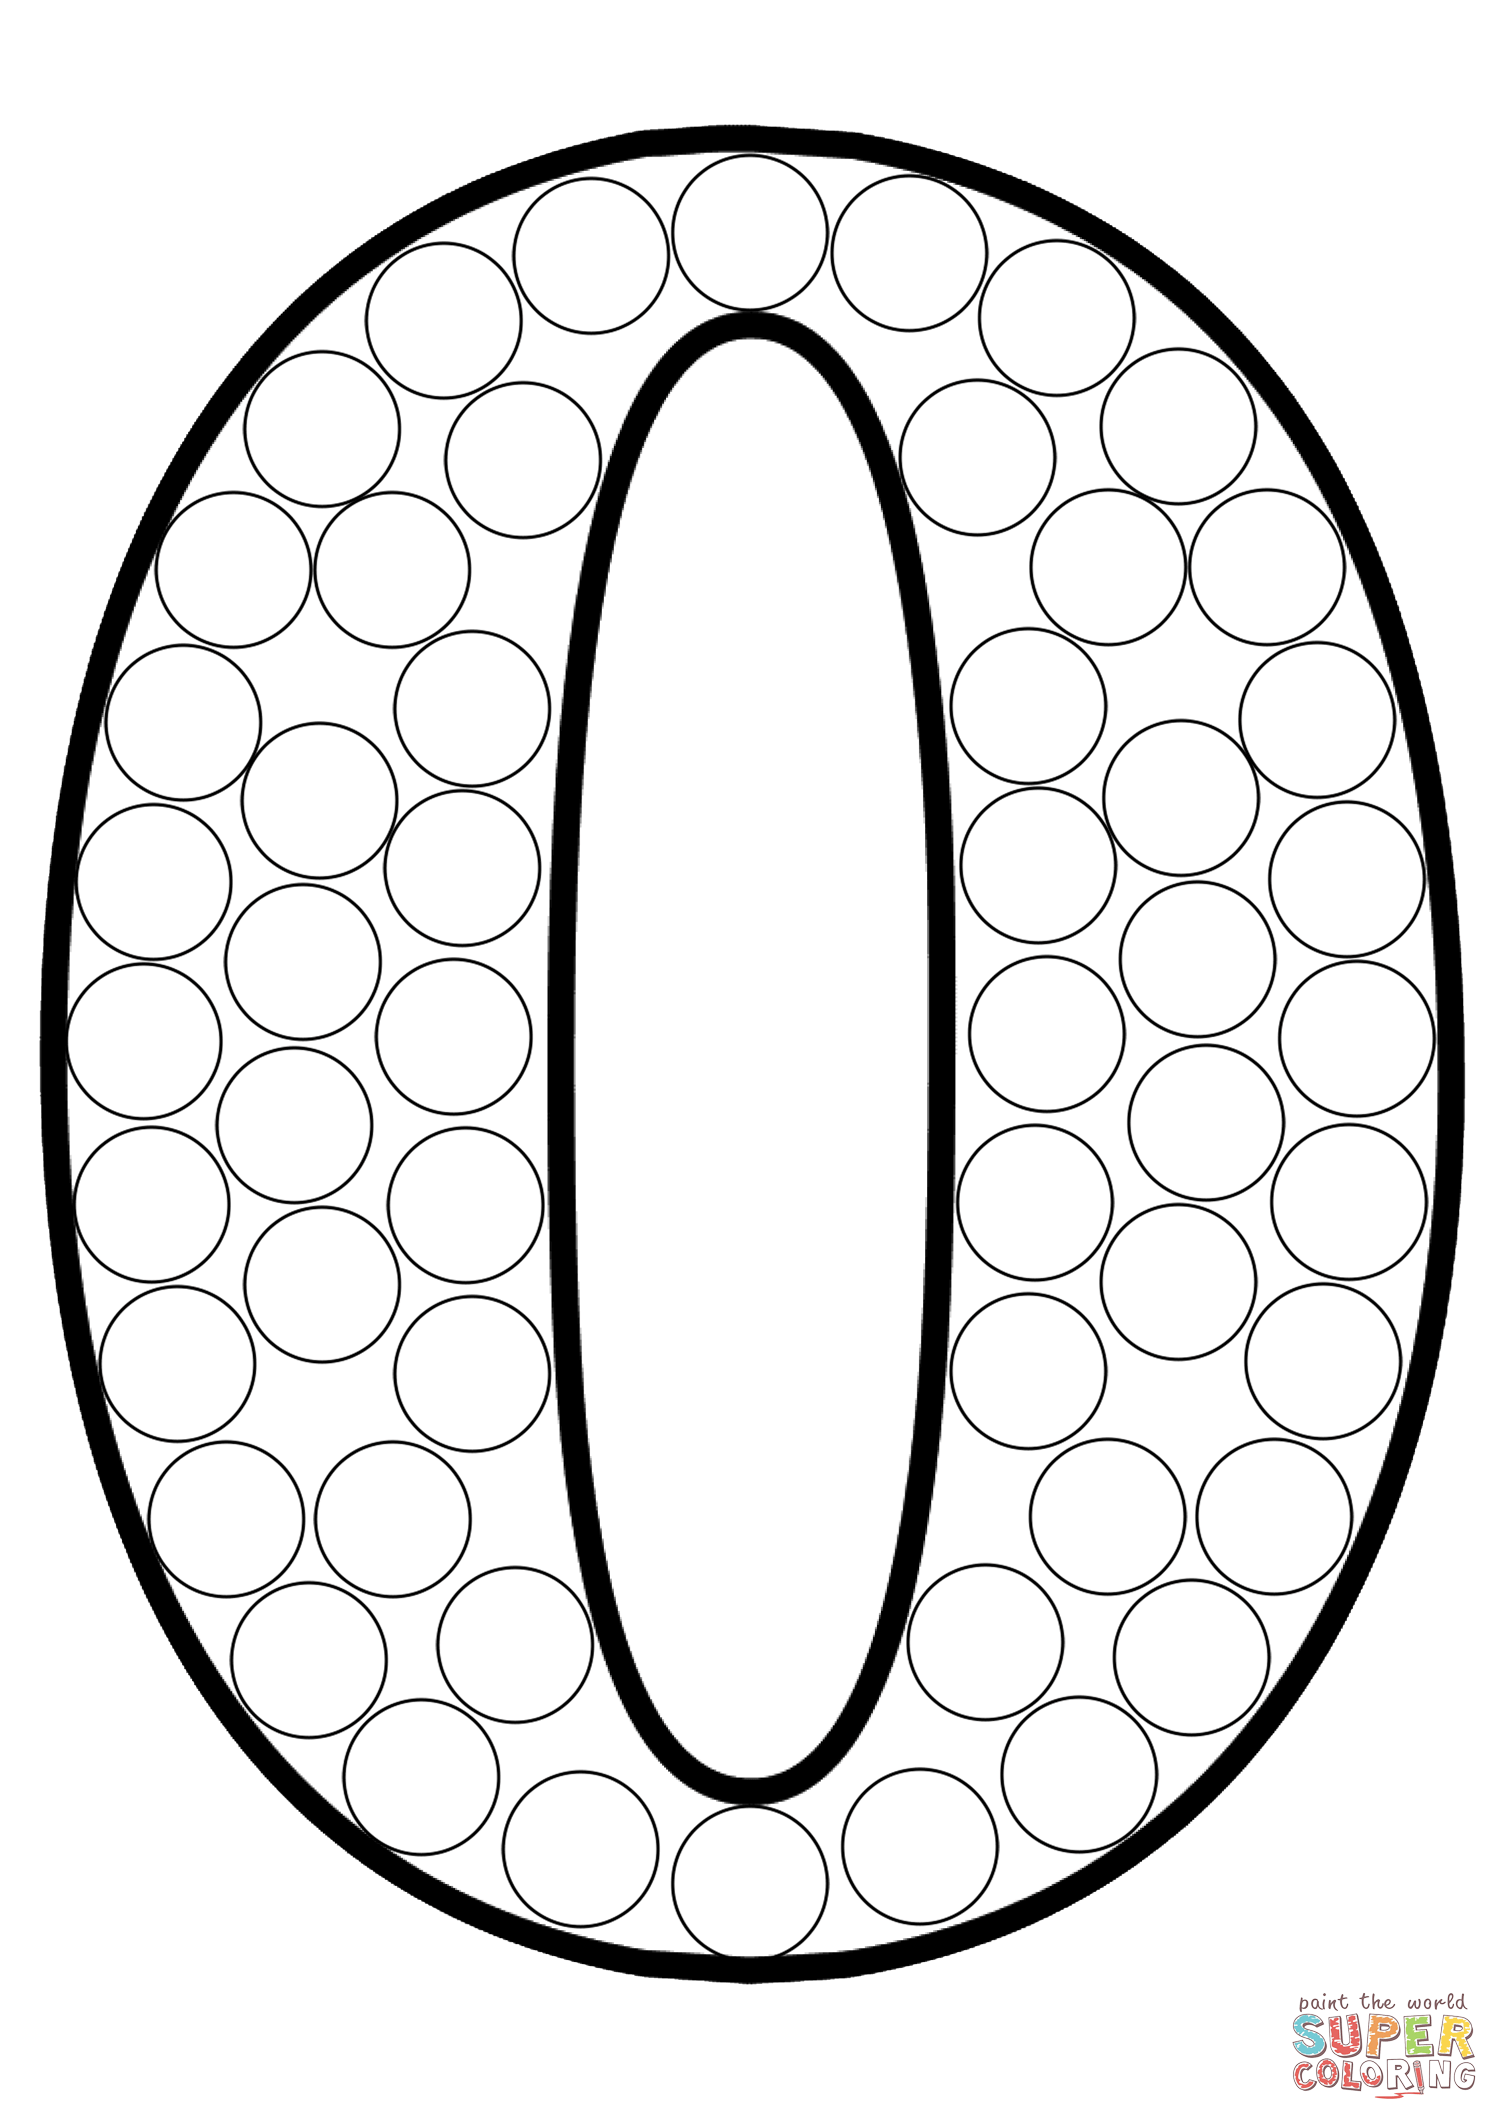 Number dot art coloring page free printable coloring pages